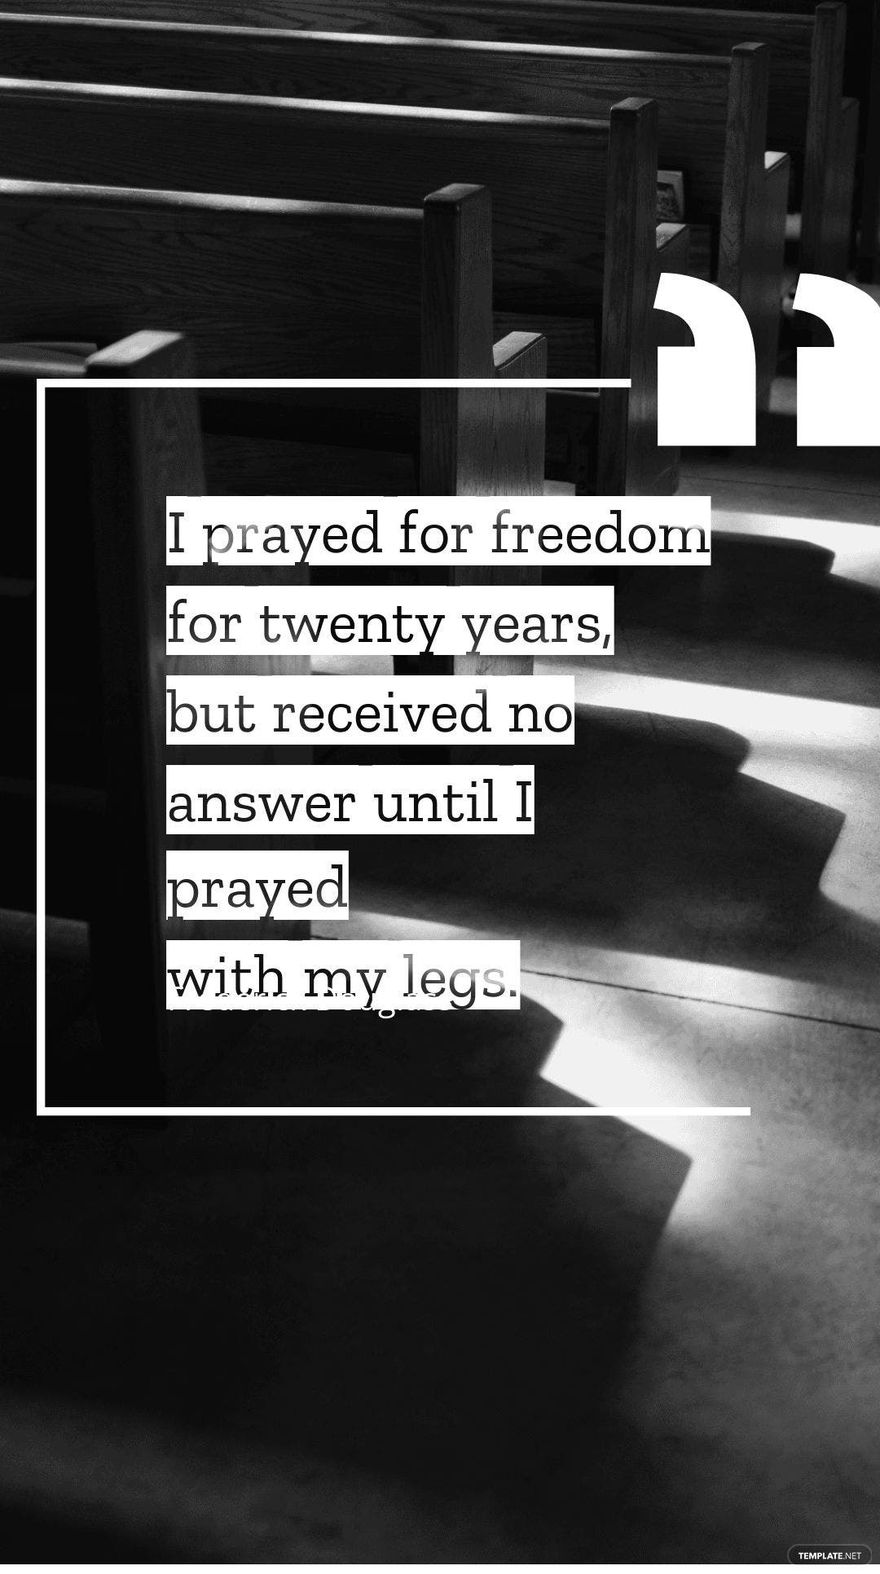 Free Frederick Douglass - I prayed for freedom for twenty years, but received no answer until I prayed with my legs. in JPG